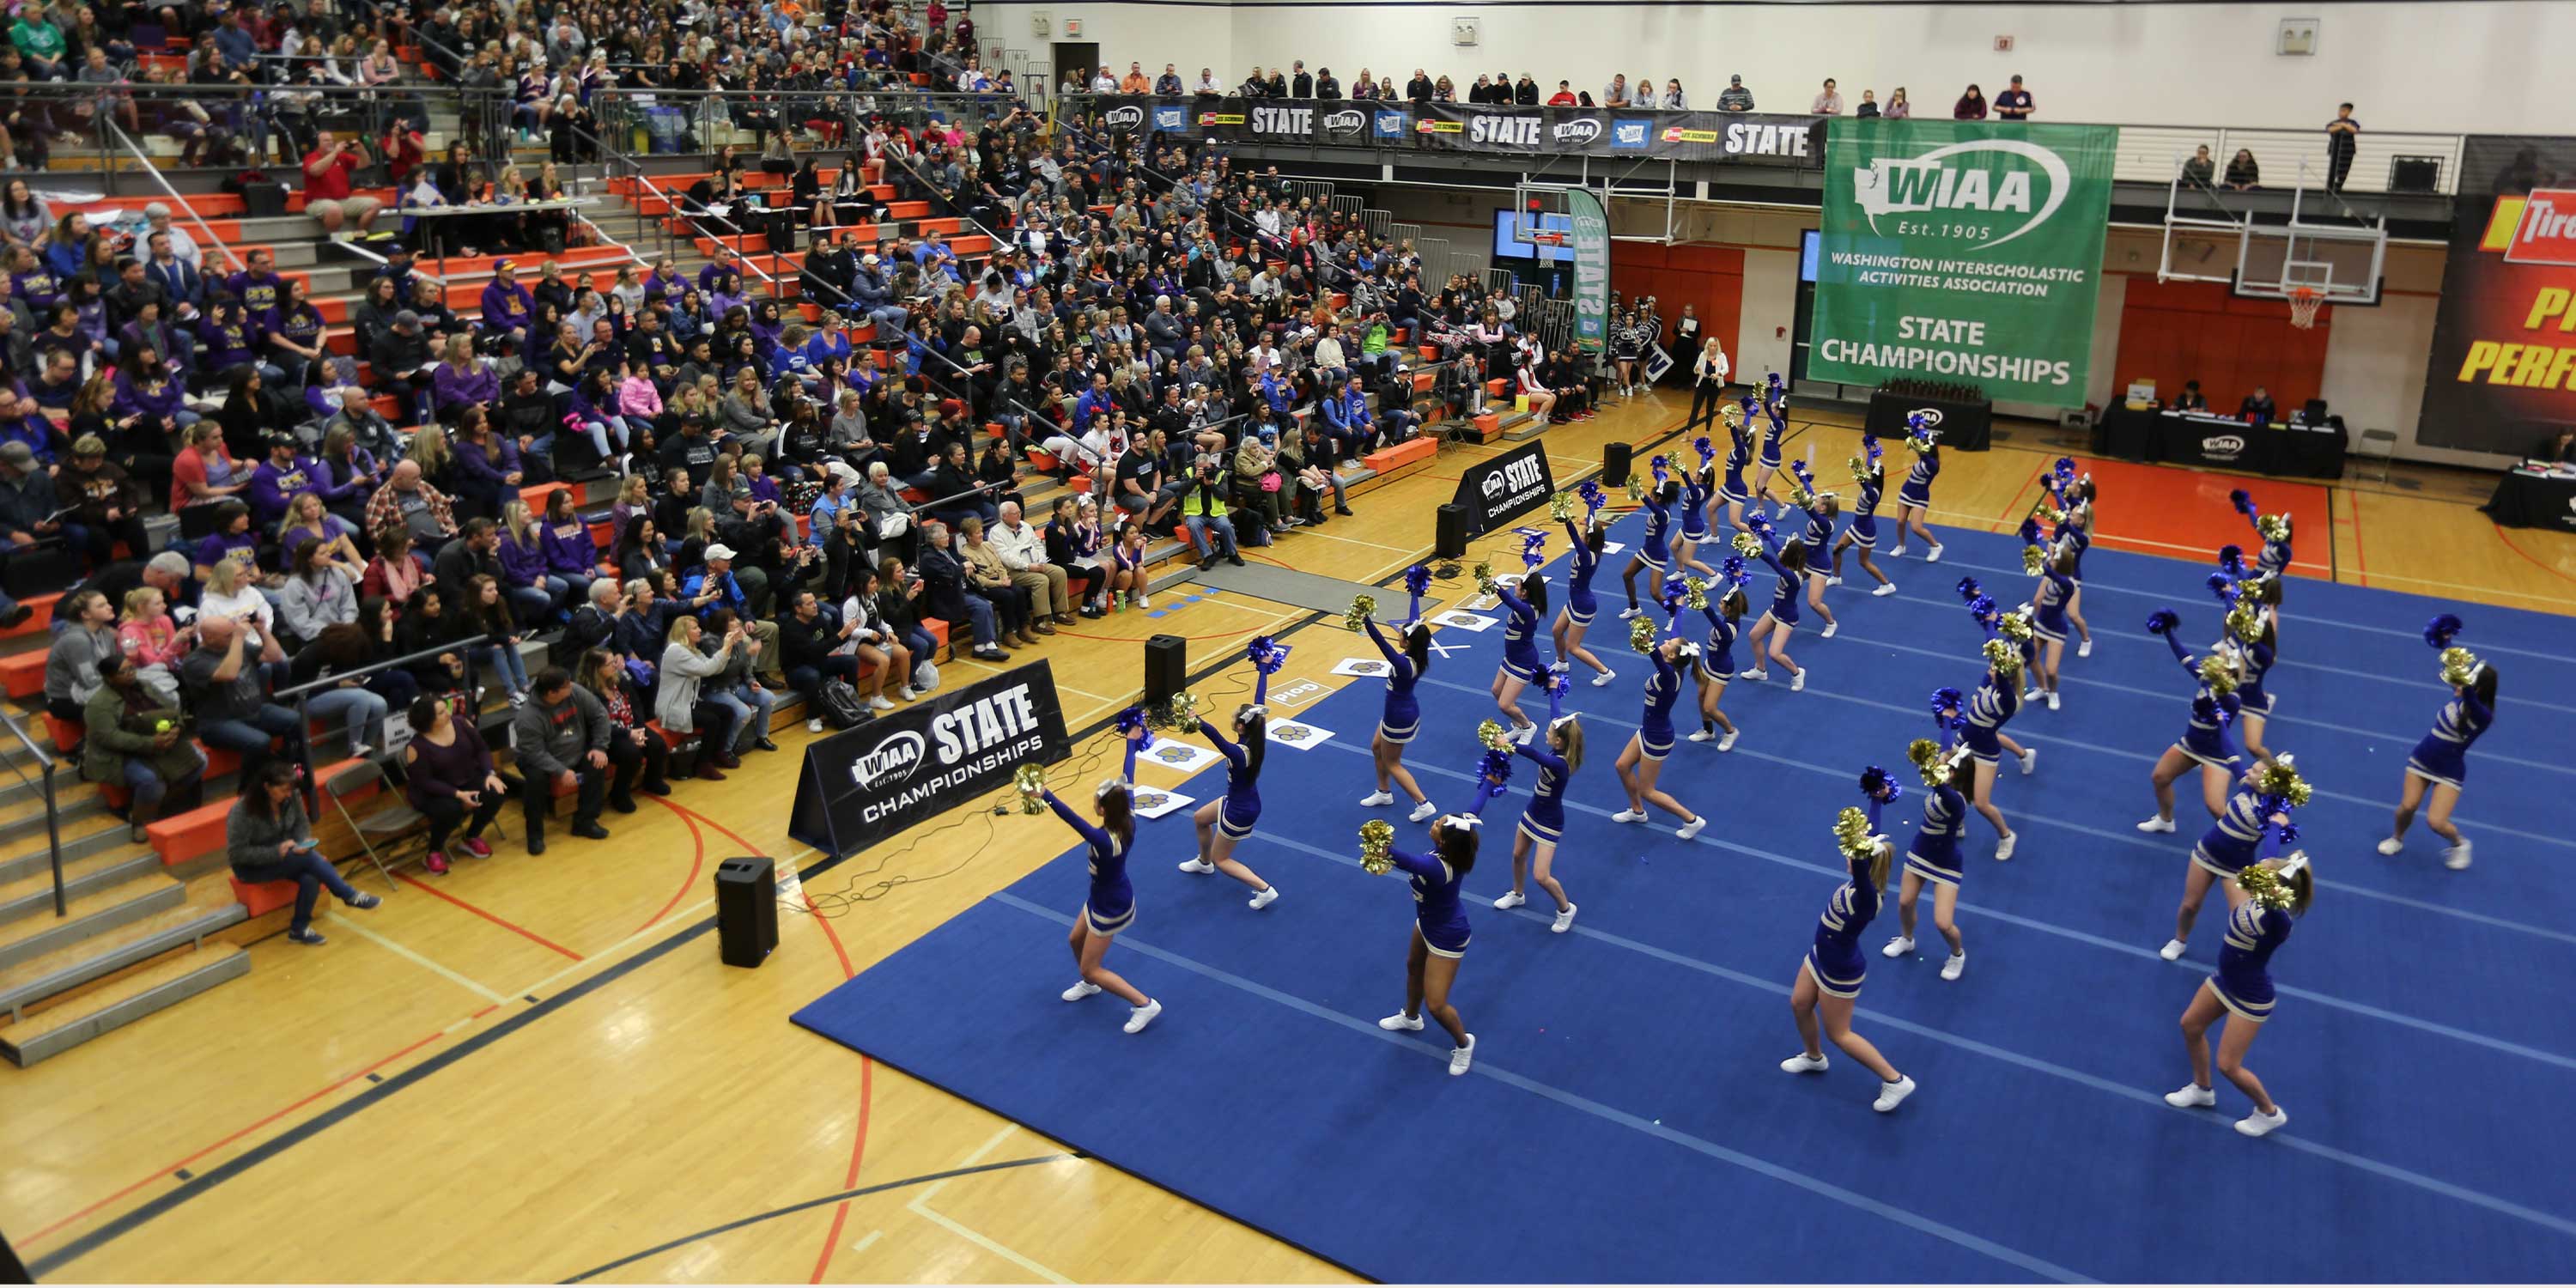 A cheer team demonstrates excellence.